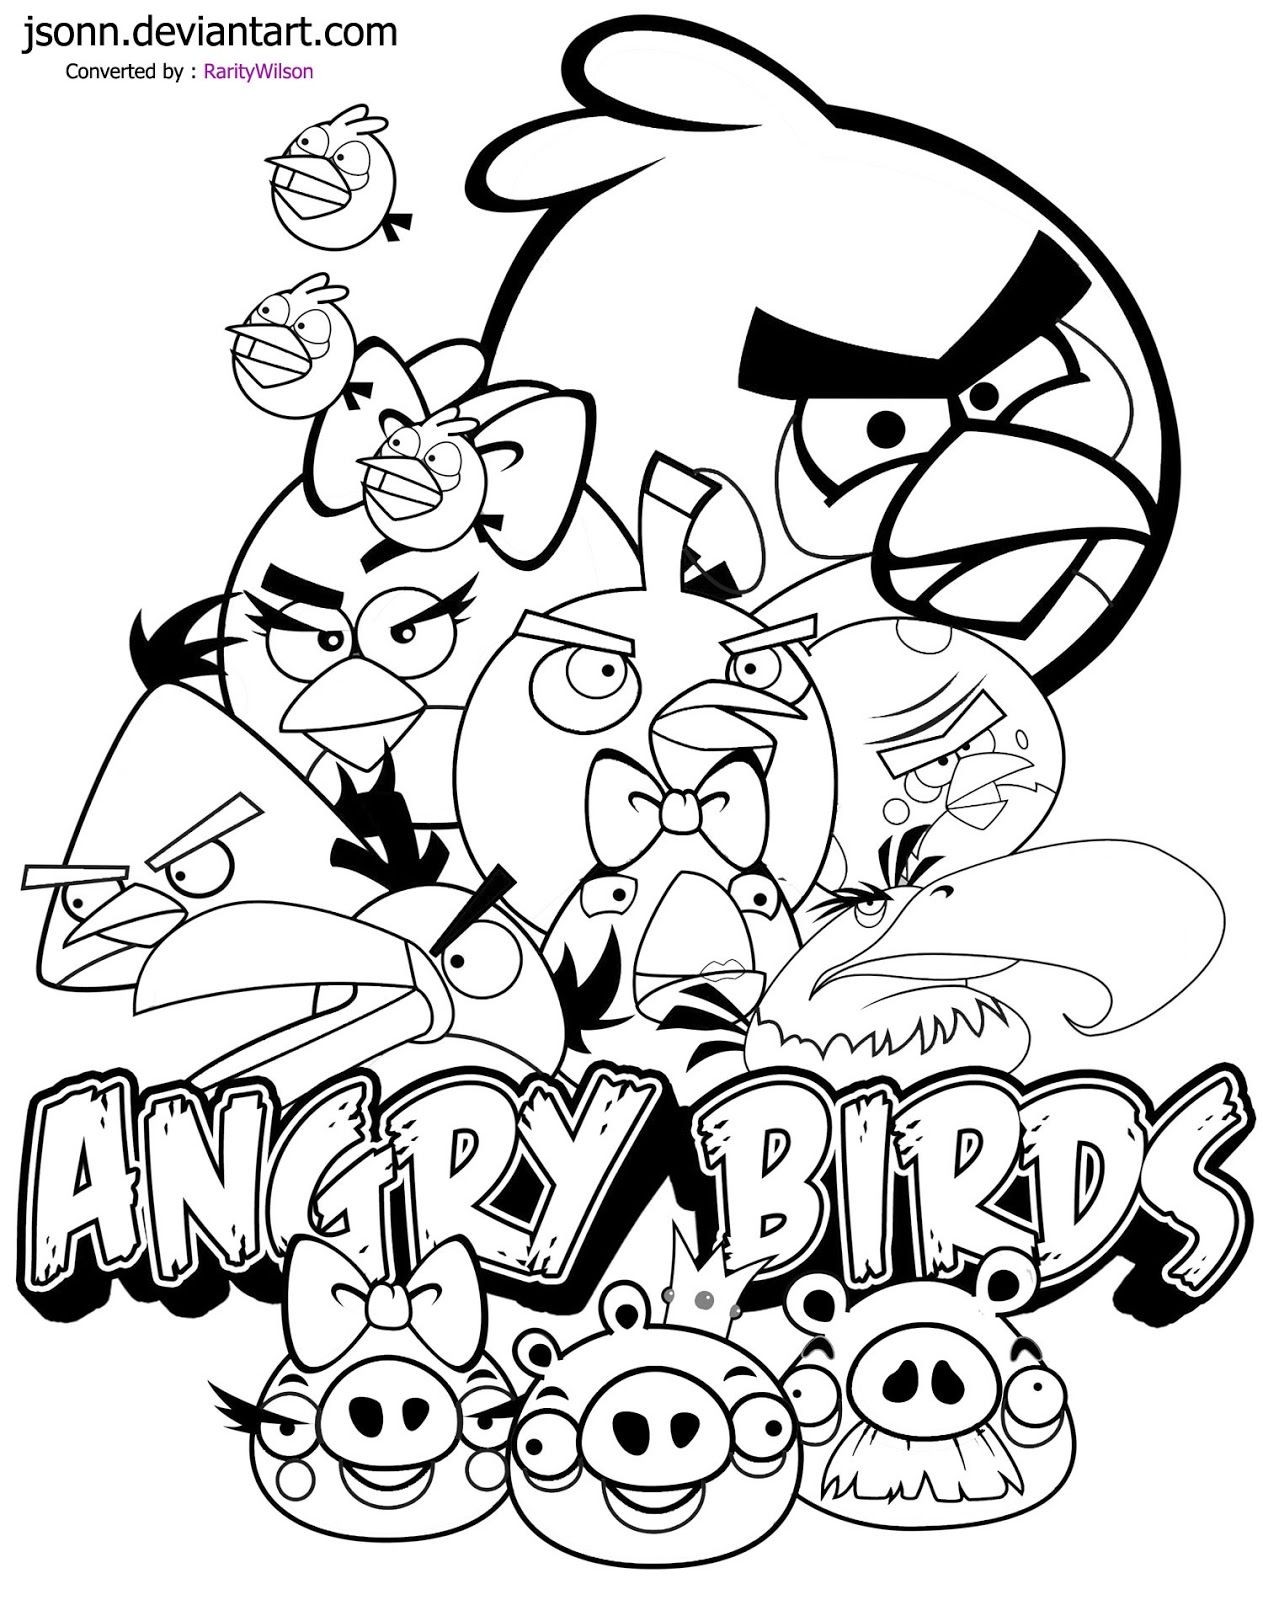 Angry Birds Printables Coloring Pages At Getcolorings.com | Free